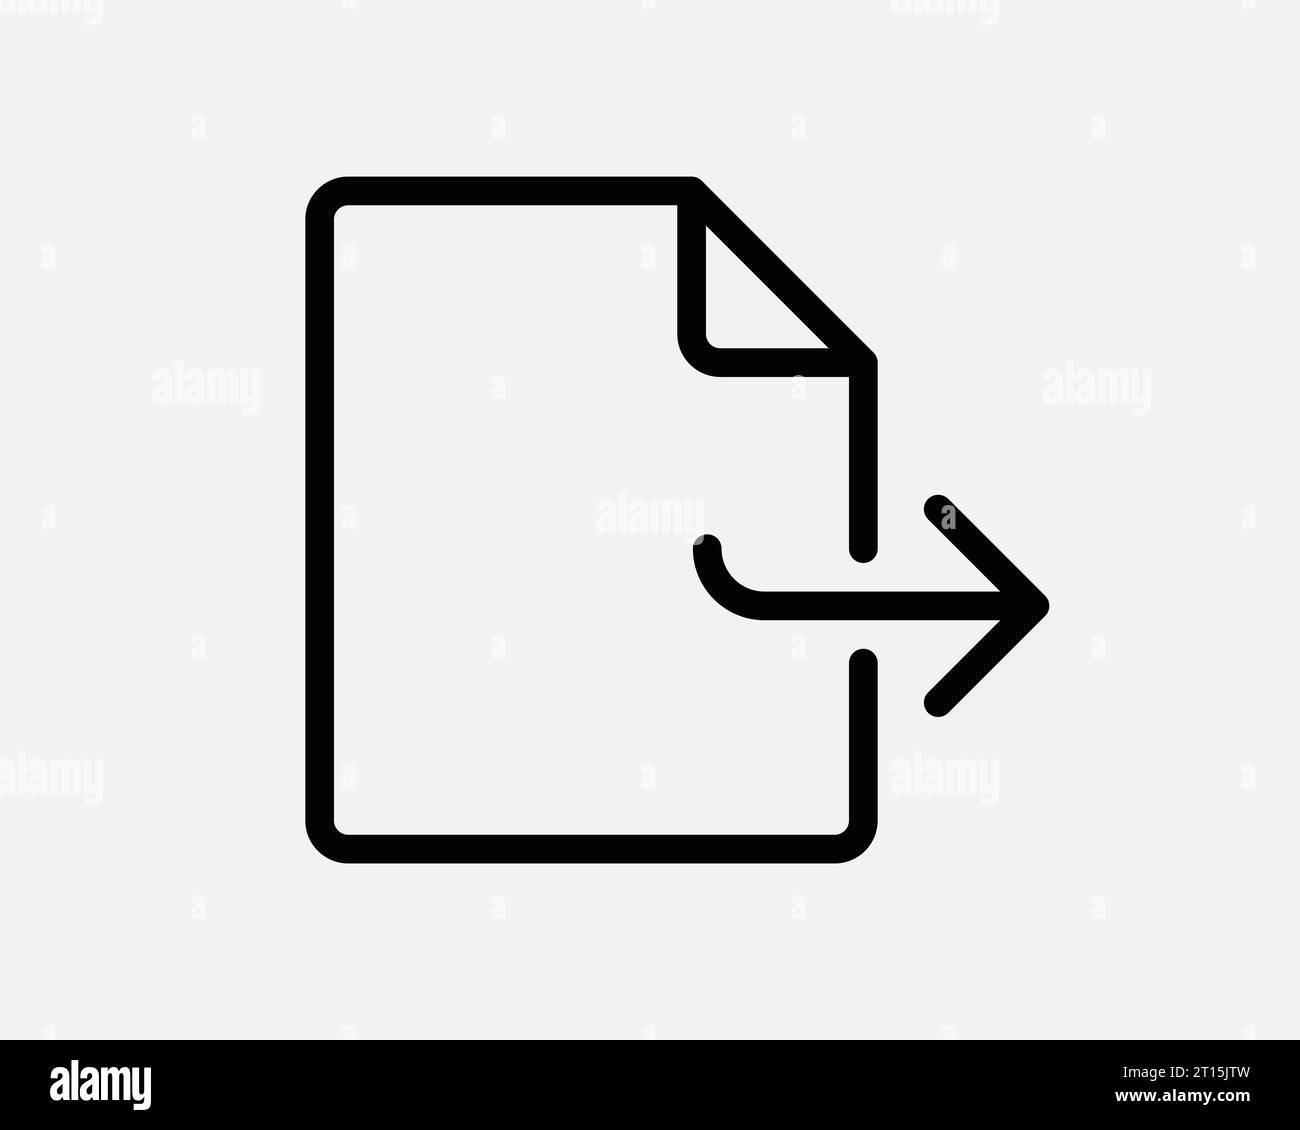 Forward File Document Icon Arrow Share Send Next Page Archive Reply Navigation Response Respond Black White Outline Line Shape Sign Symbol EPS Vector Stock Vector